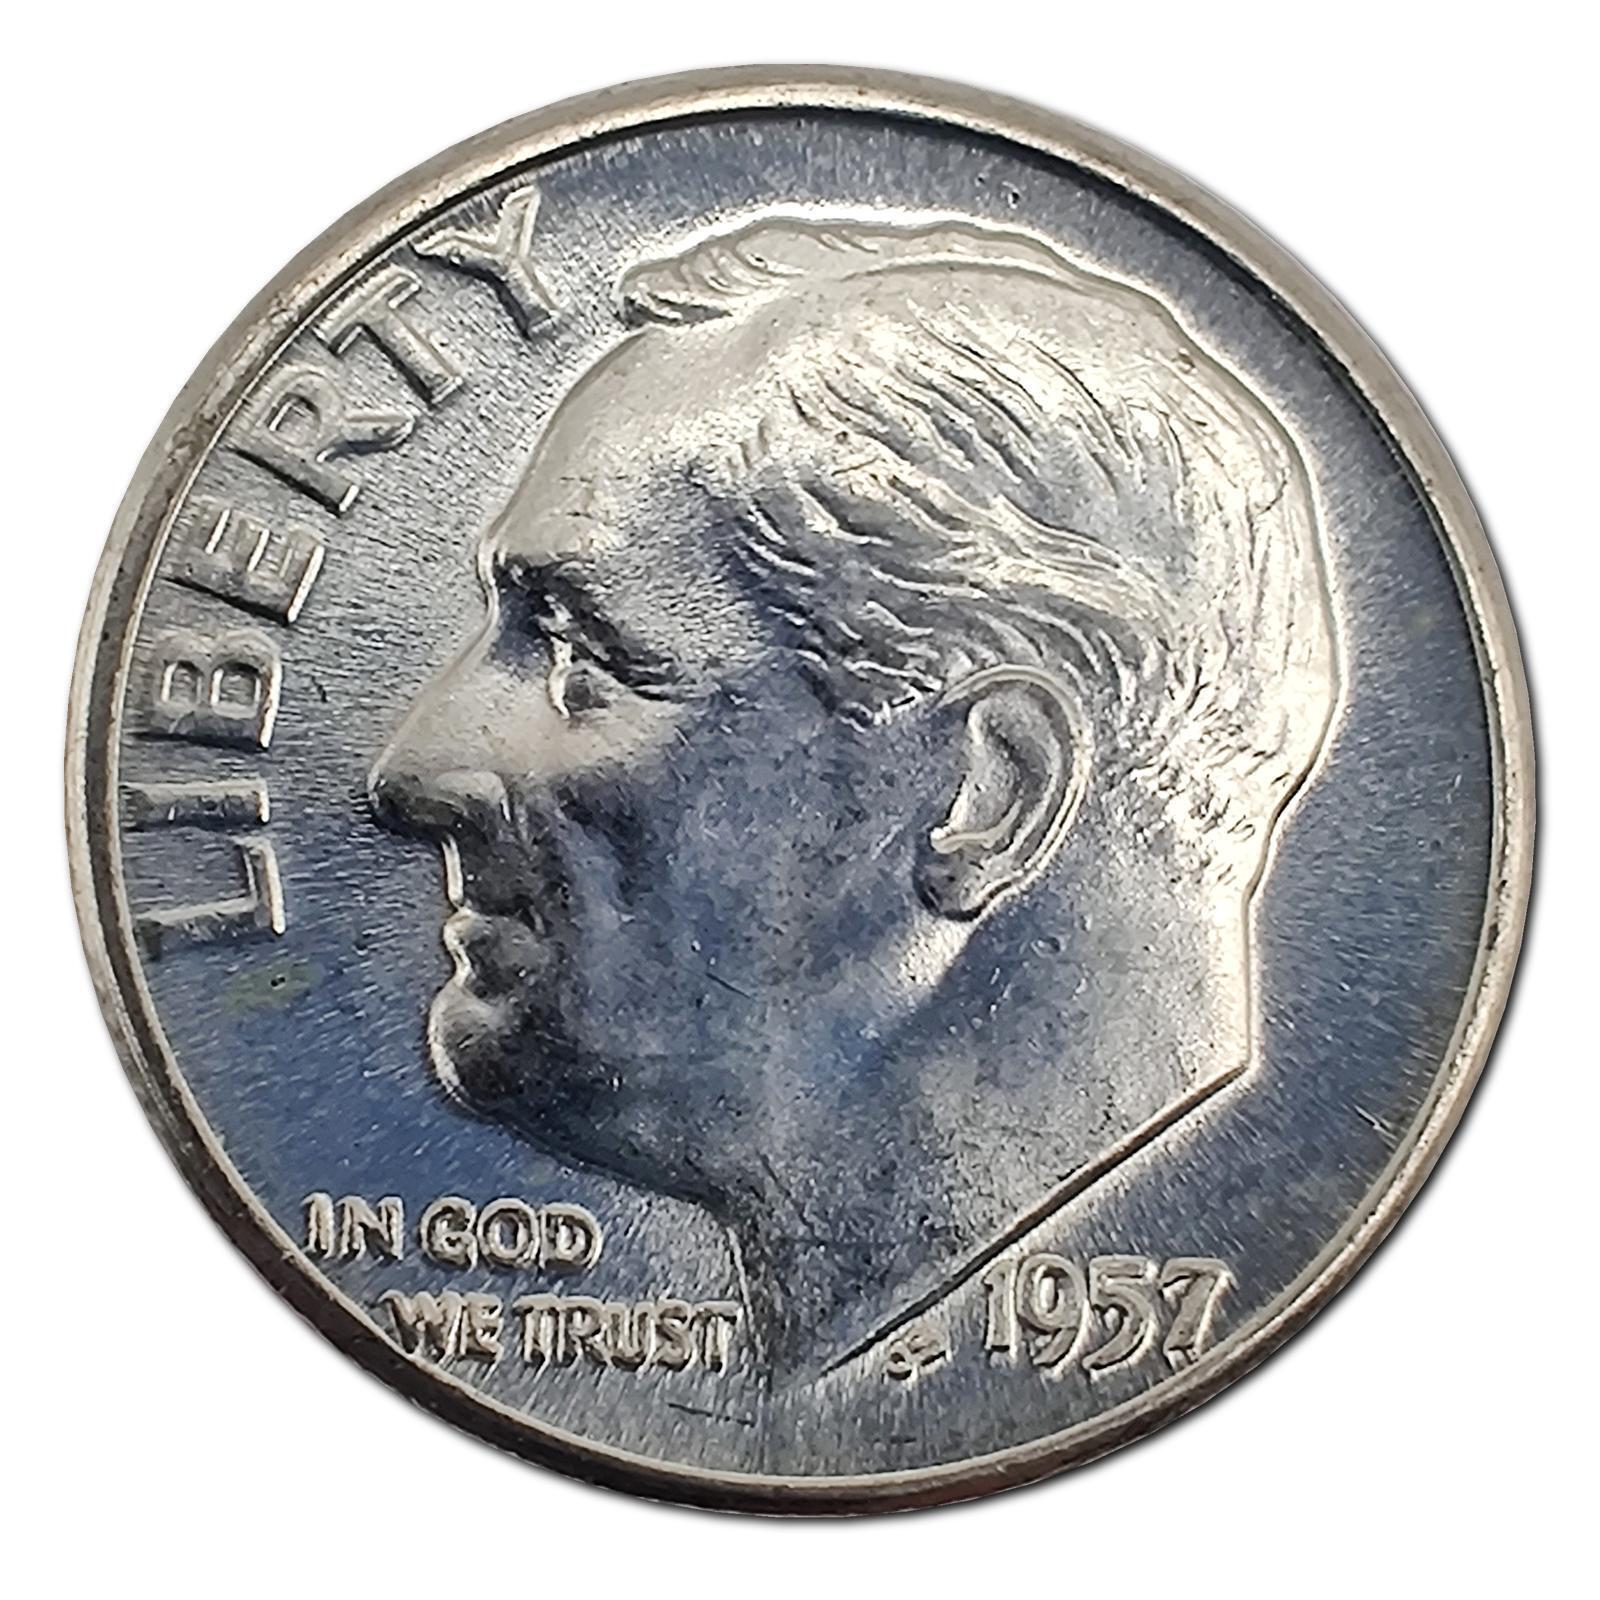 1957-P Uncirculated Roosevelt Dime MS Mint State 90% Silver